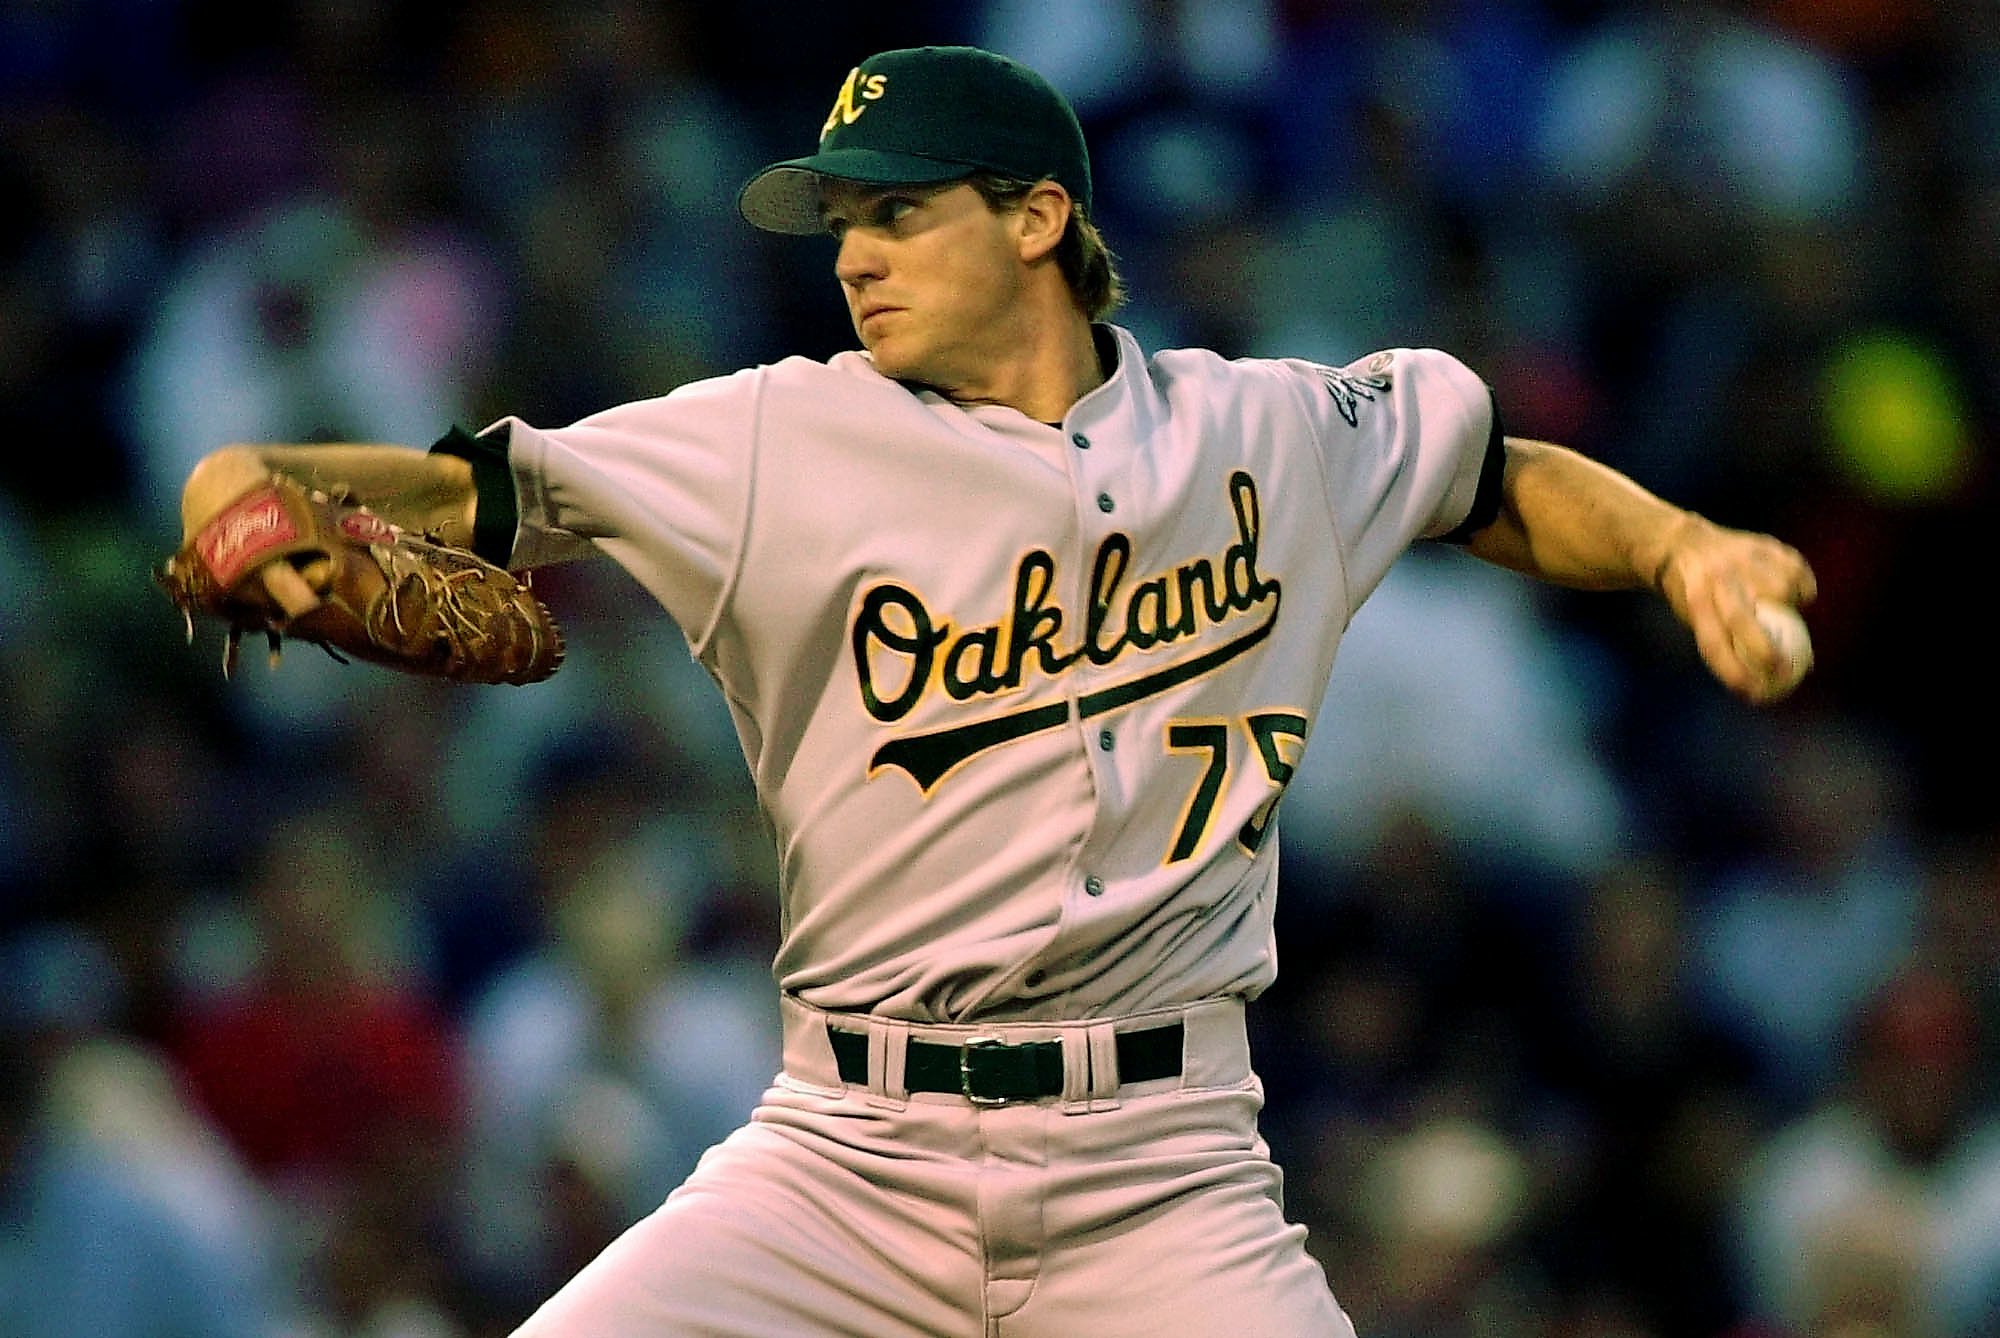 May 16, 2002: Barry Zito, A's stifle Red Sox at Fenway